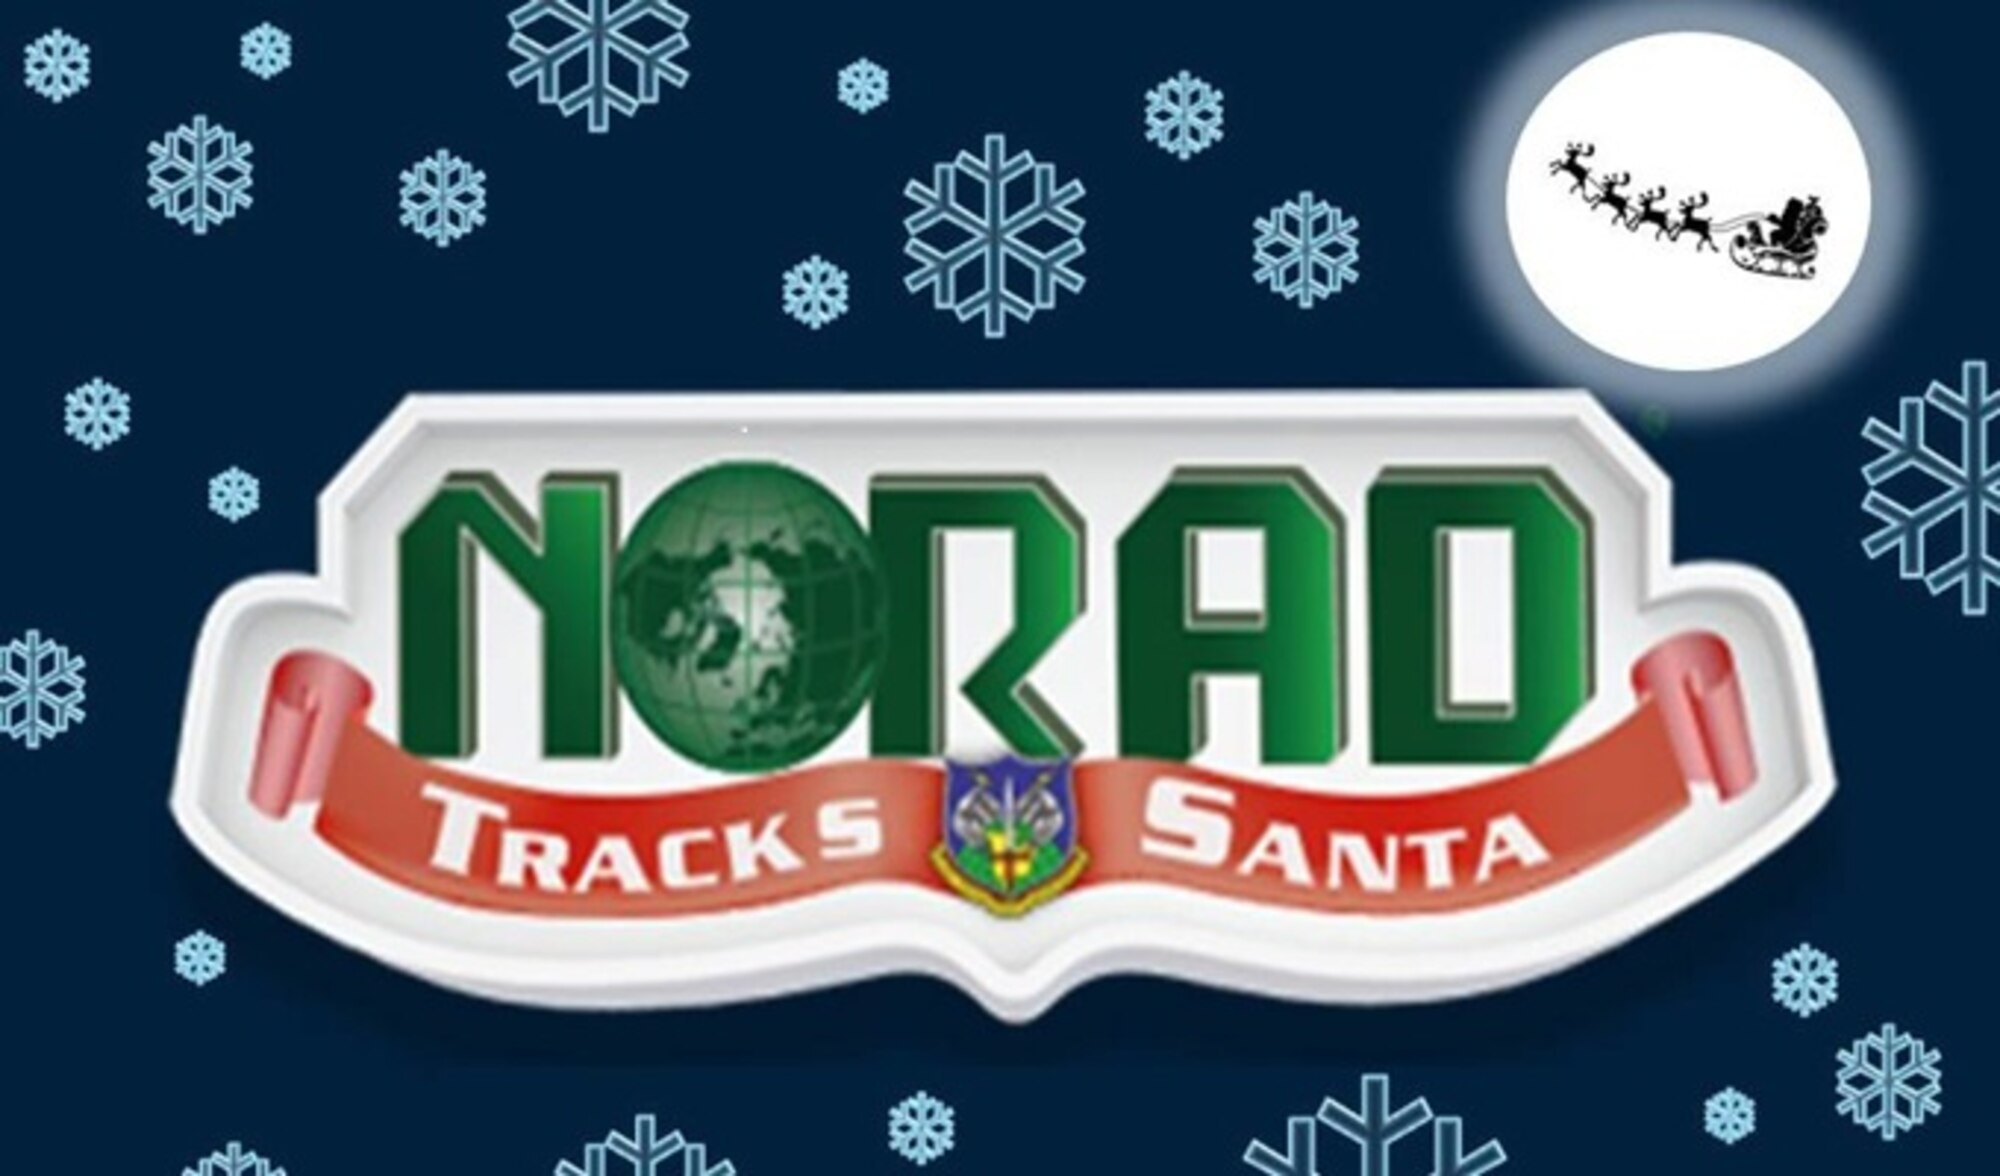 The 63rd iteration of NORAD Tracks Santa kicked off Dec. 1, with a more mobile friendly website at http:// www.noradsanta.org, social media channels, “Santa Cam” streaming video and a call center that will be operating around the clock on Dec. 24.